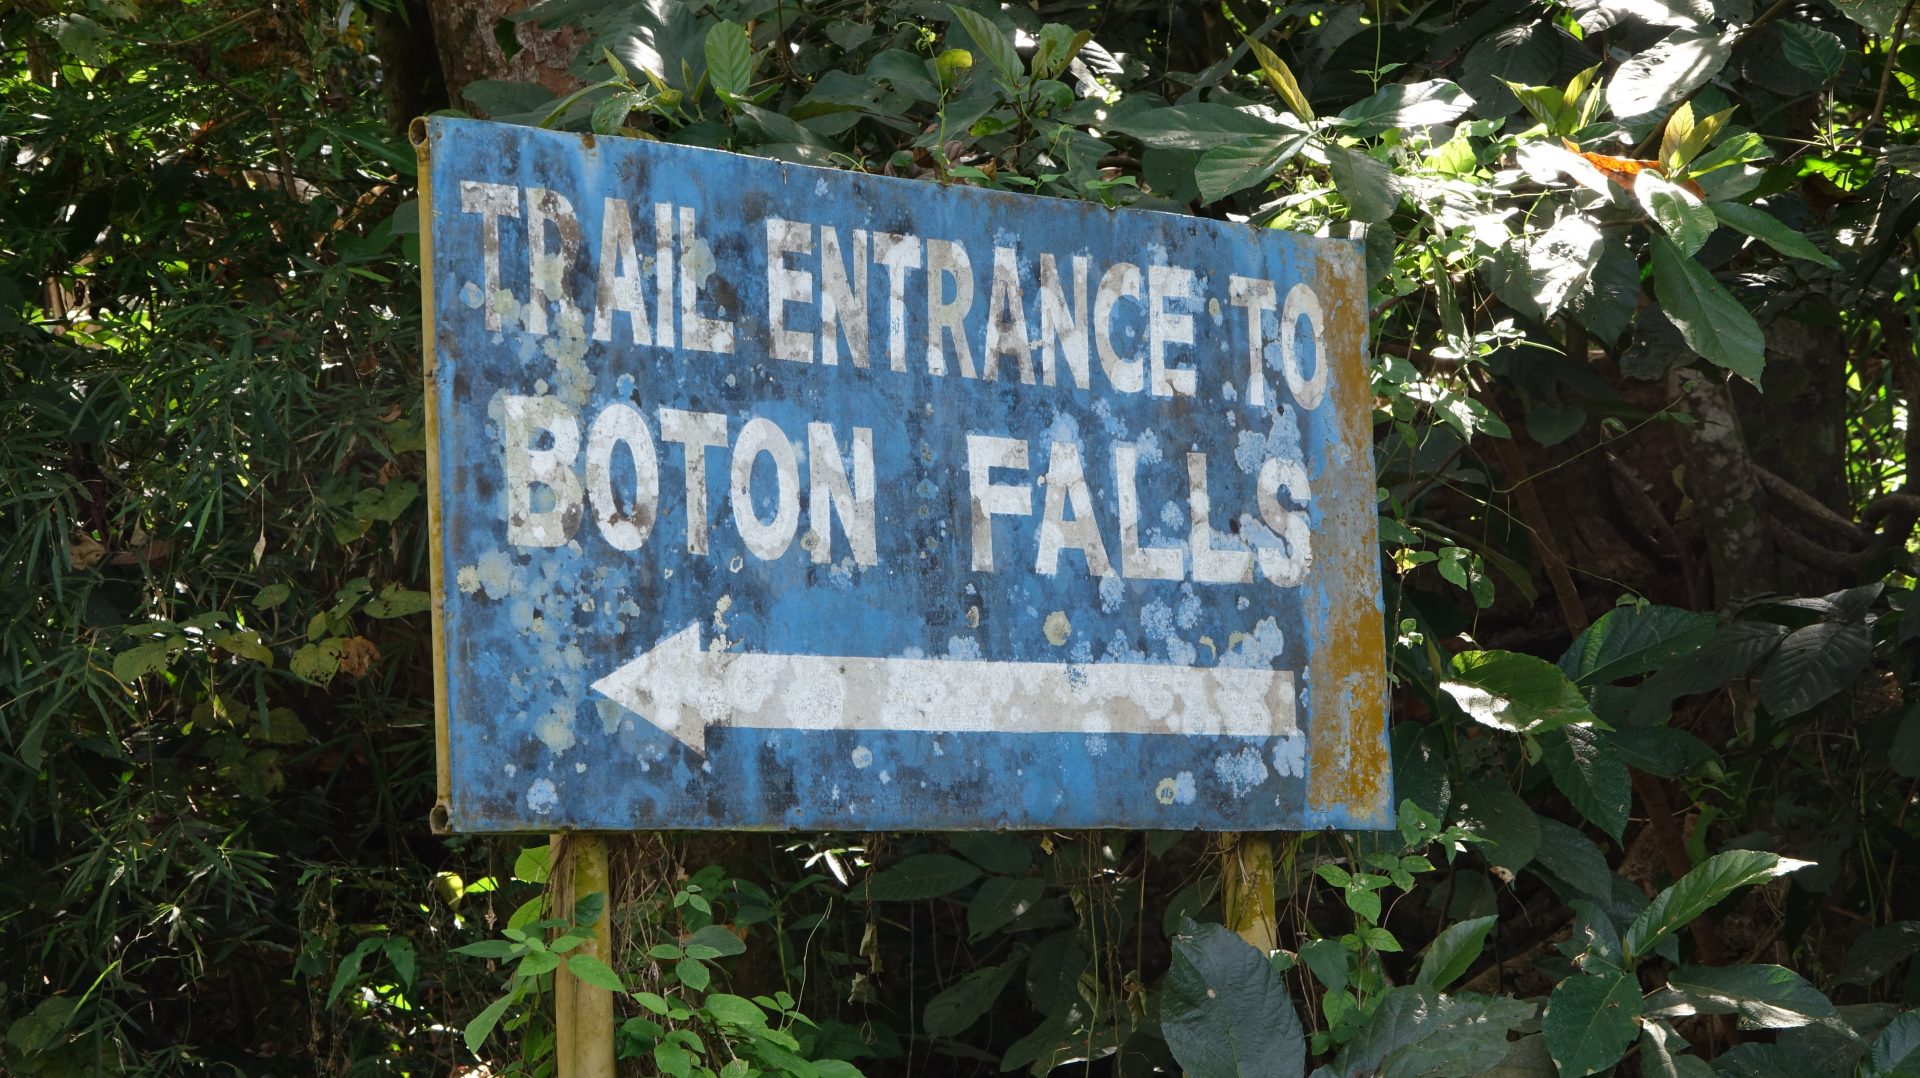 Sign for Trail Entrance to Boton Falls on SBMA Subic Bay Naval Base Philippines Hiking